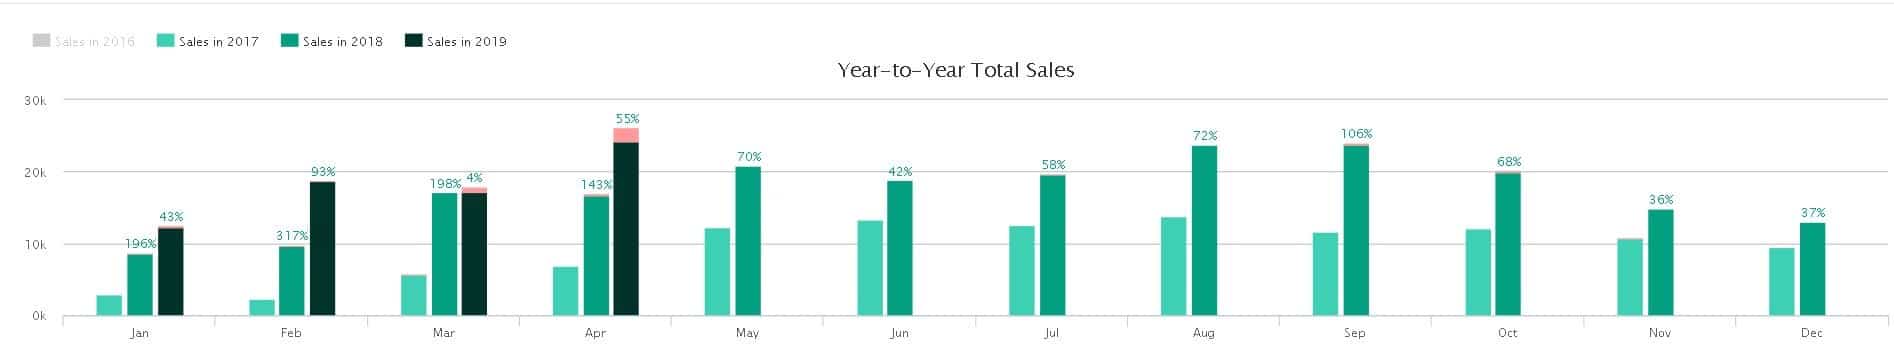 Bar graph showing Year to Year total sales.